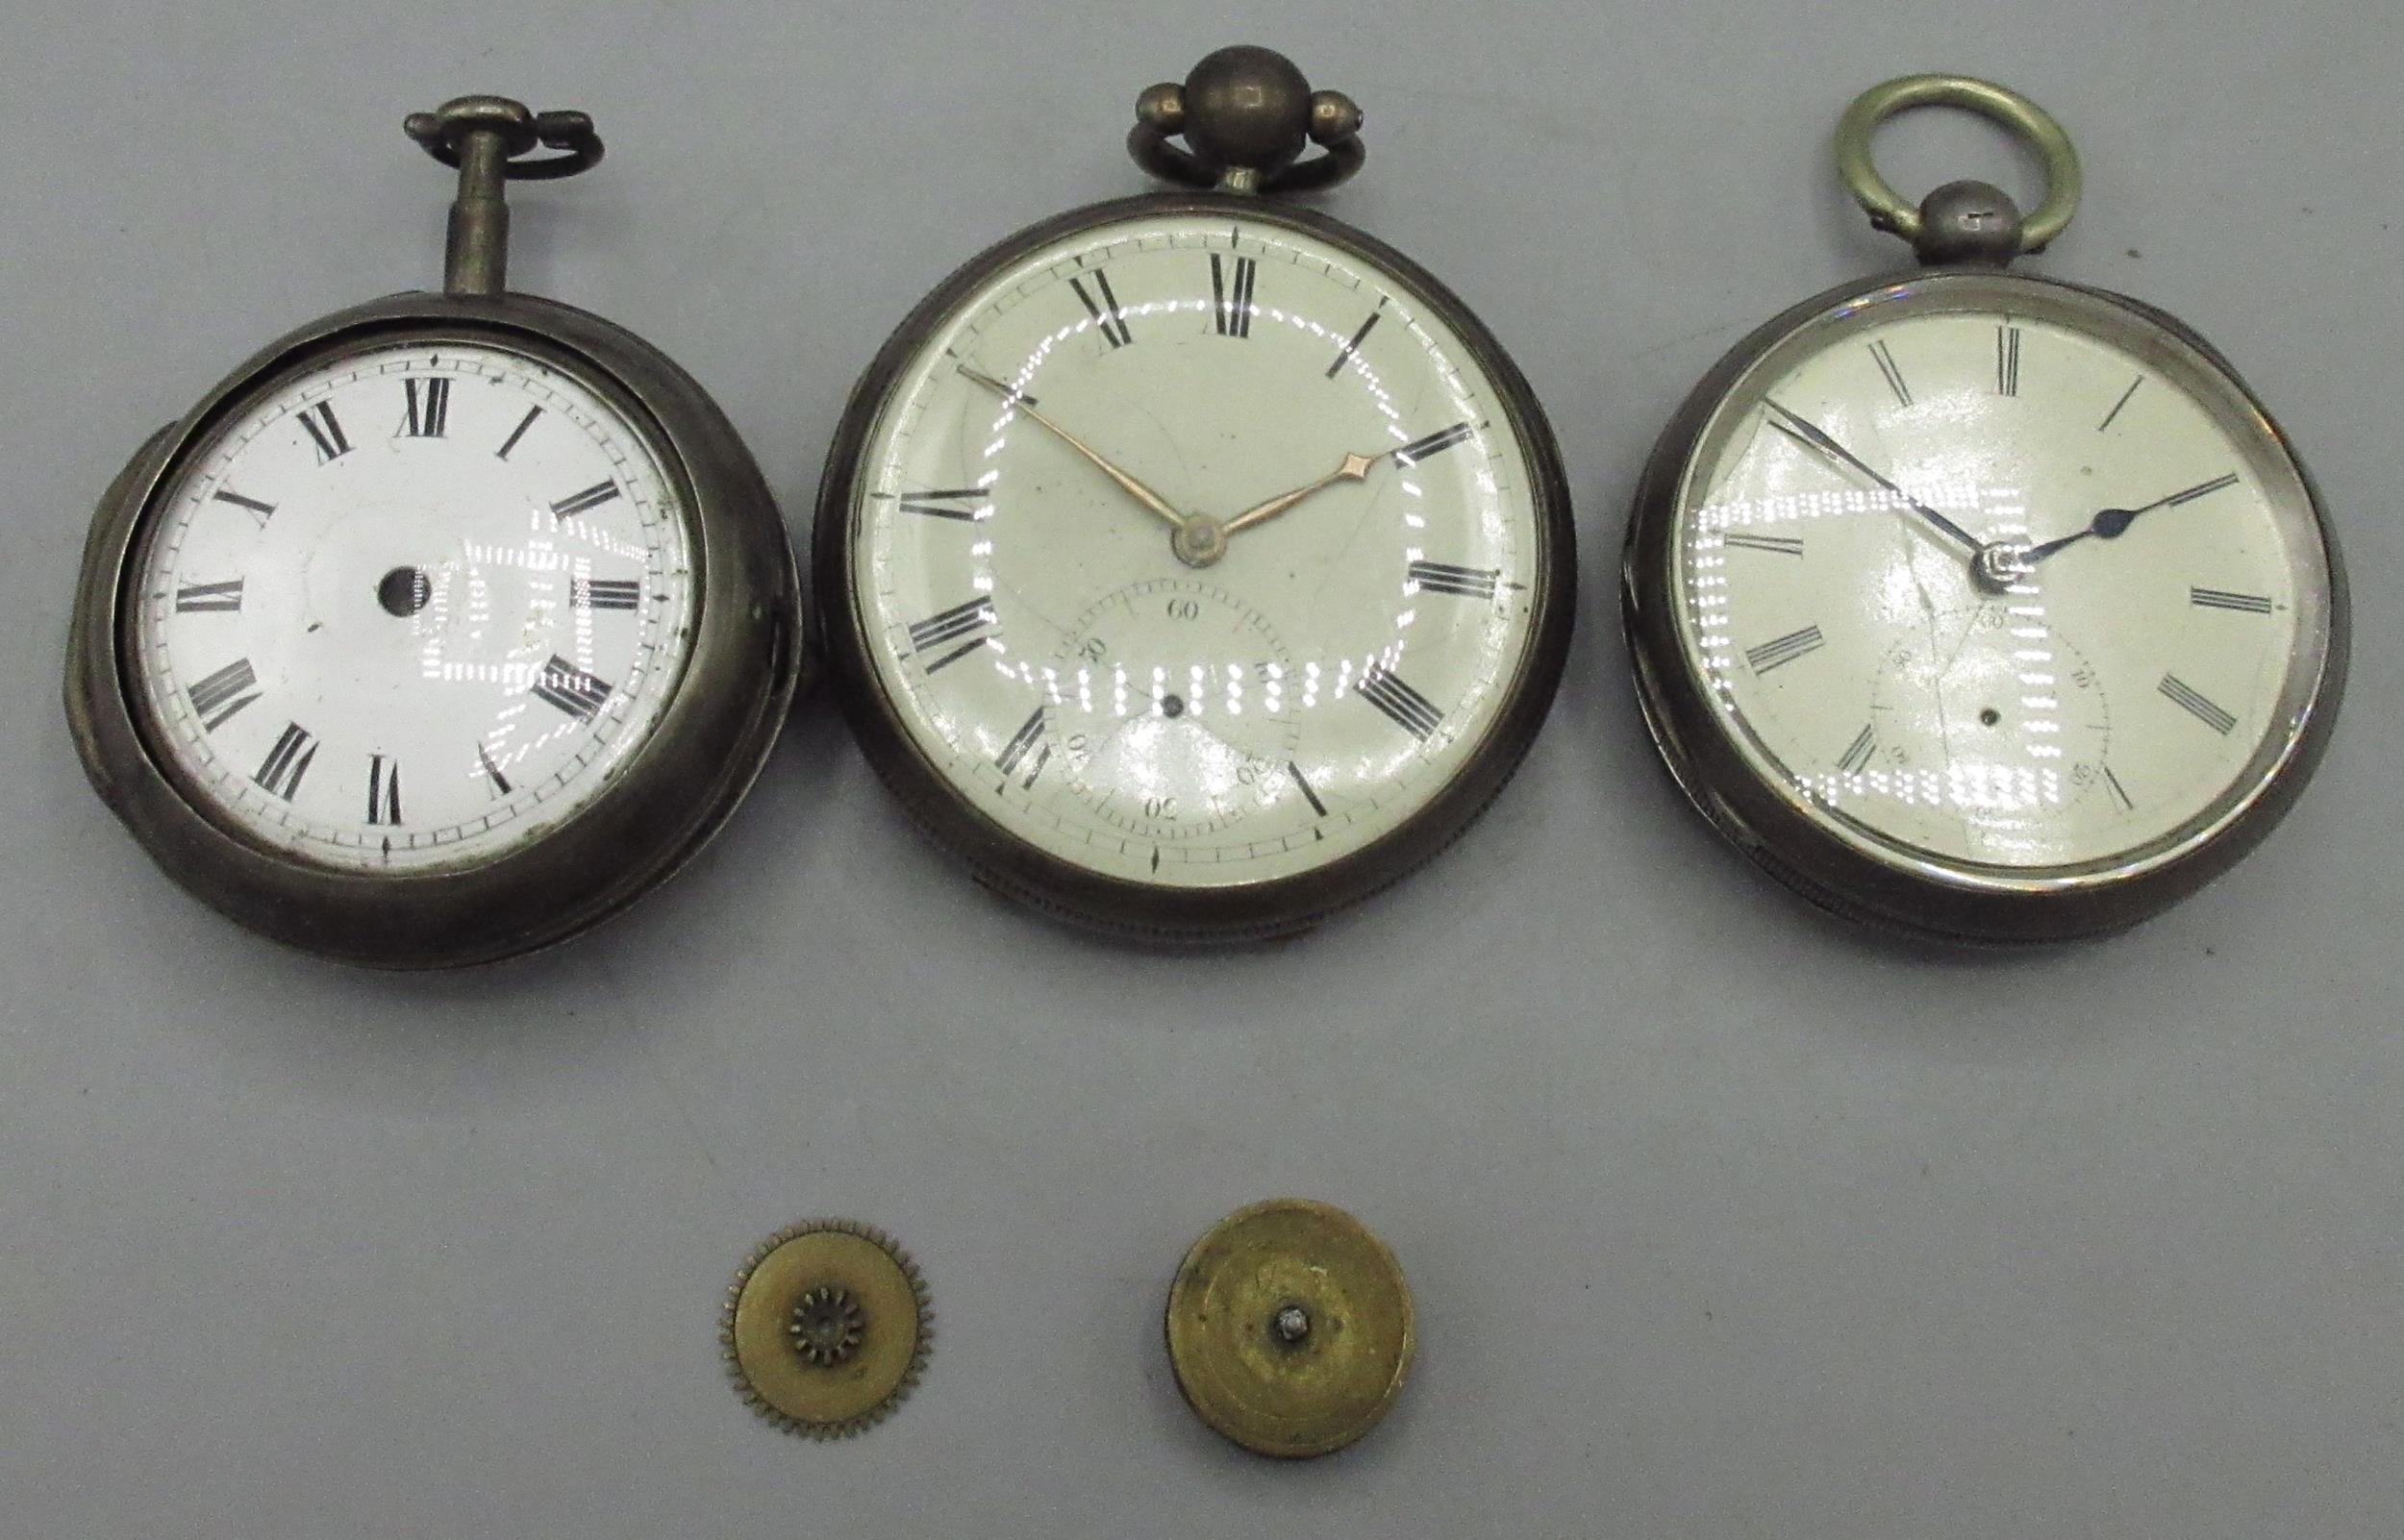 T. Cater London C18th silver verge pair case pocket watch, white enamel Roman dial, signed gilt